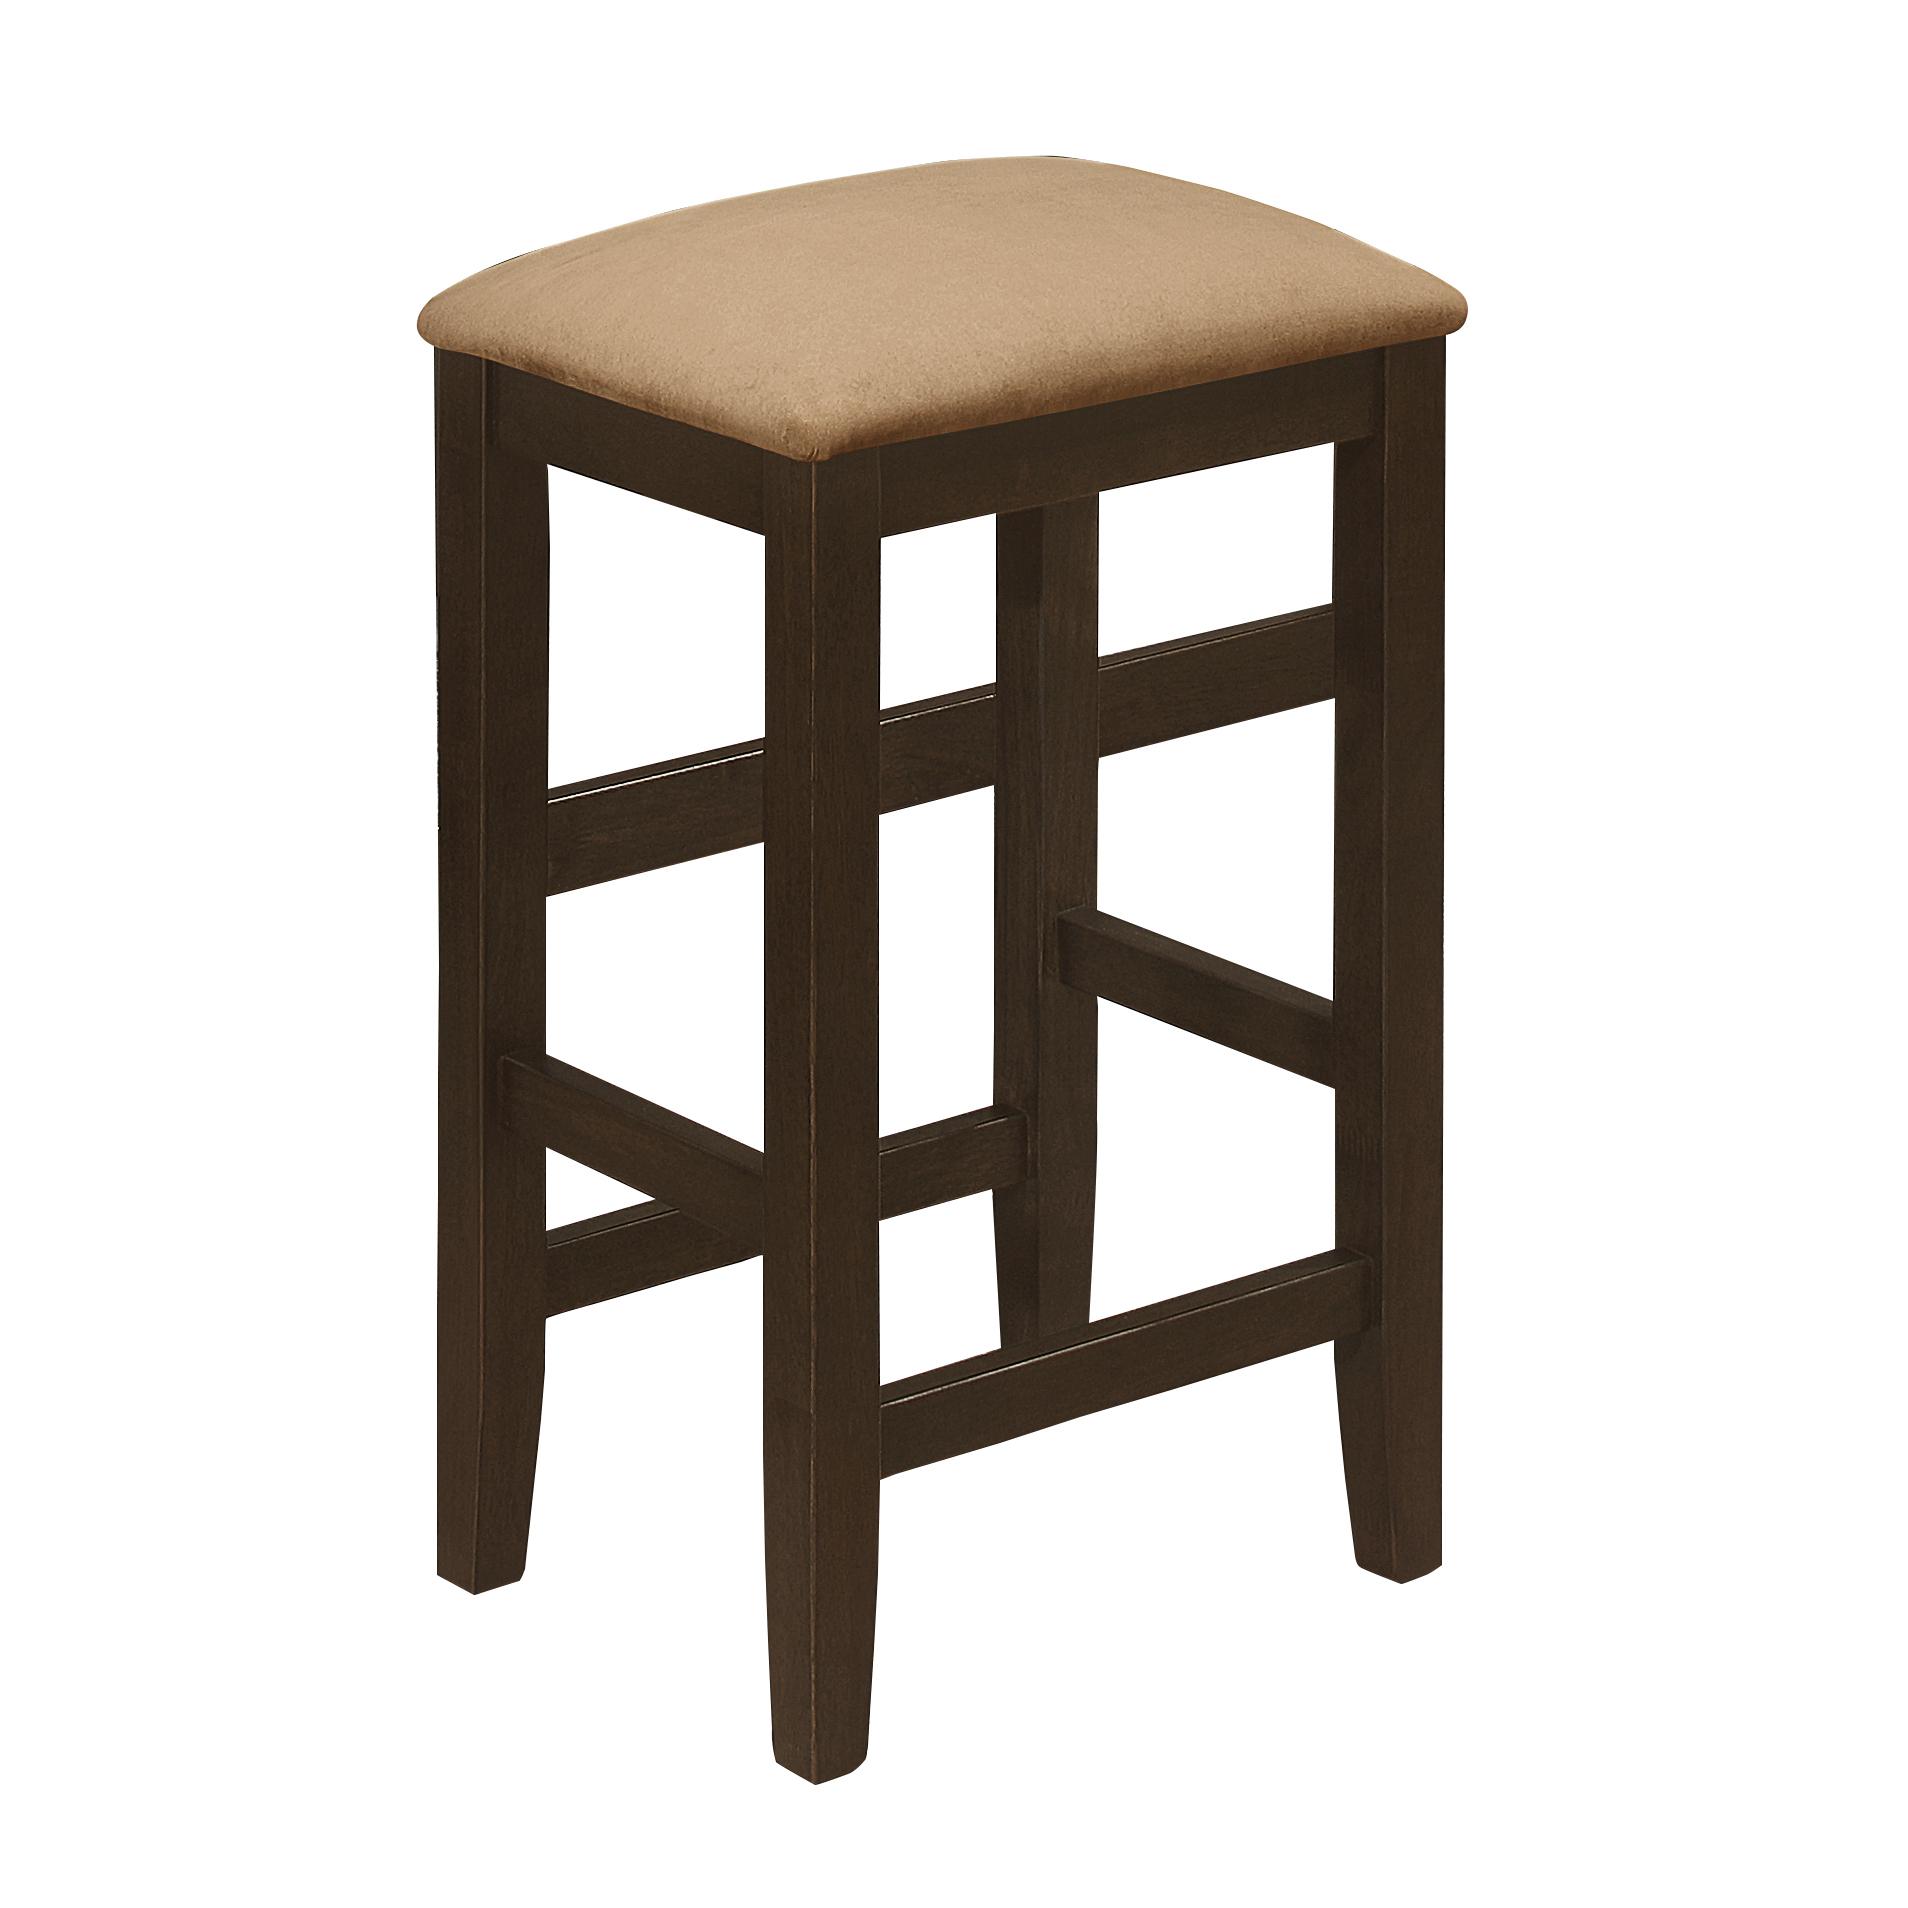 Transitional Counter Height Stool Set 193479 Carmina 193479 in Brown Microfiber